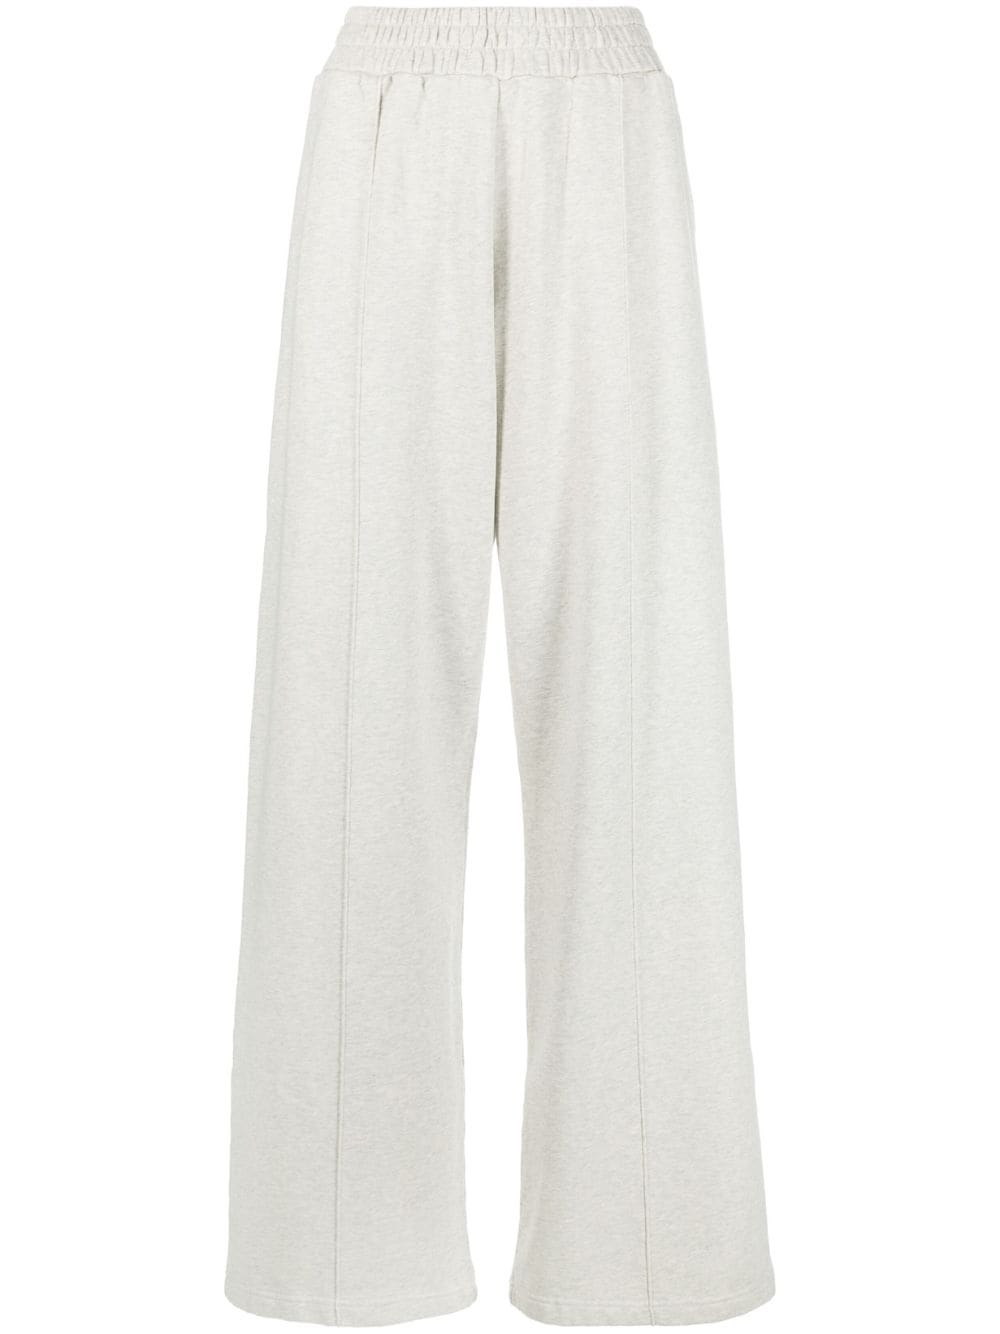 Image 1 of There Was One wide-leg cotton track pants